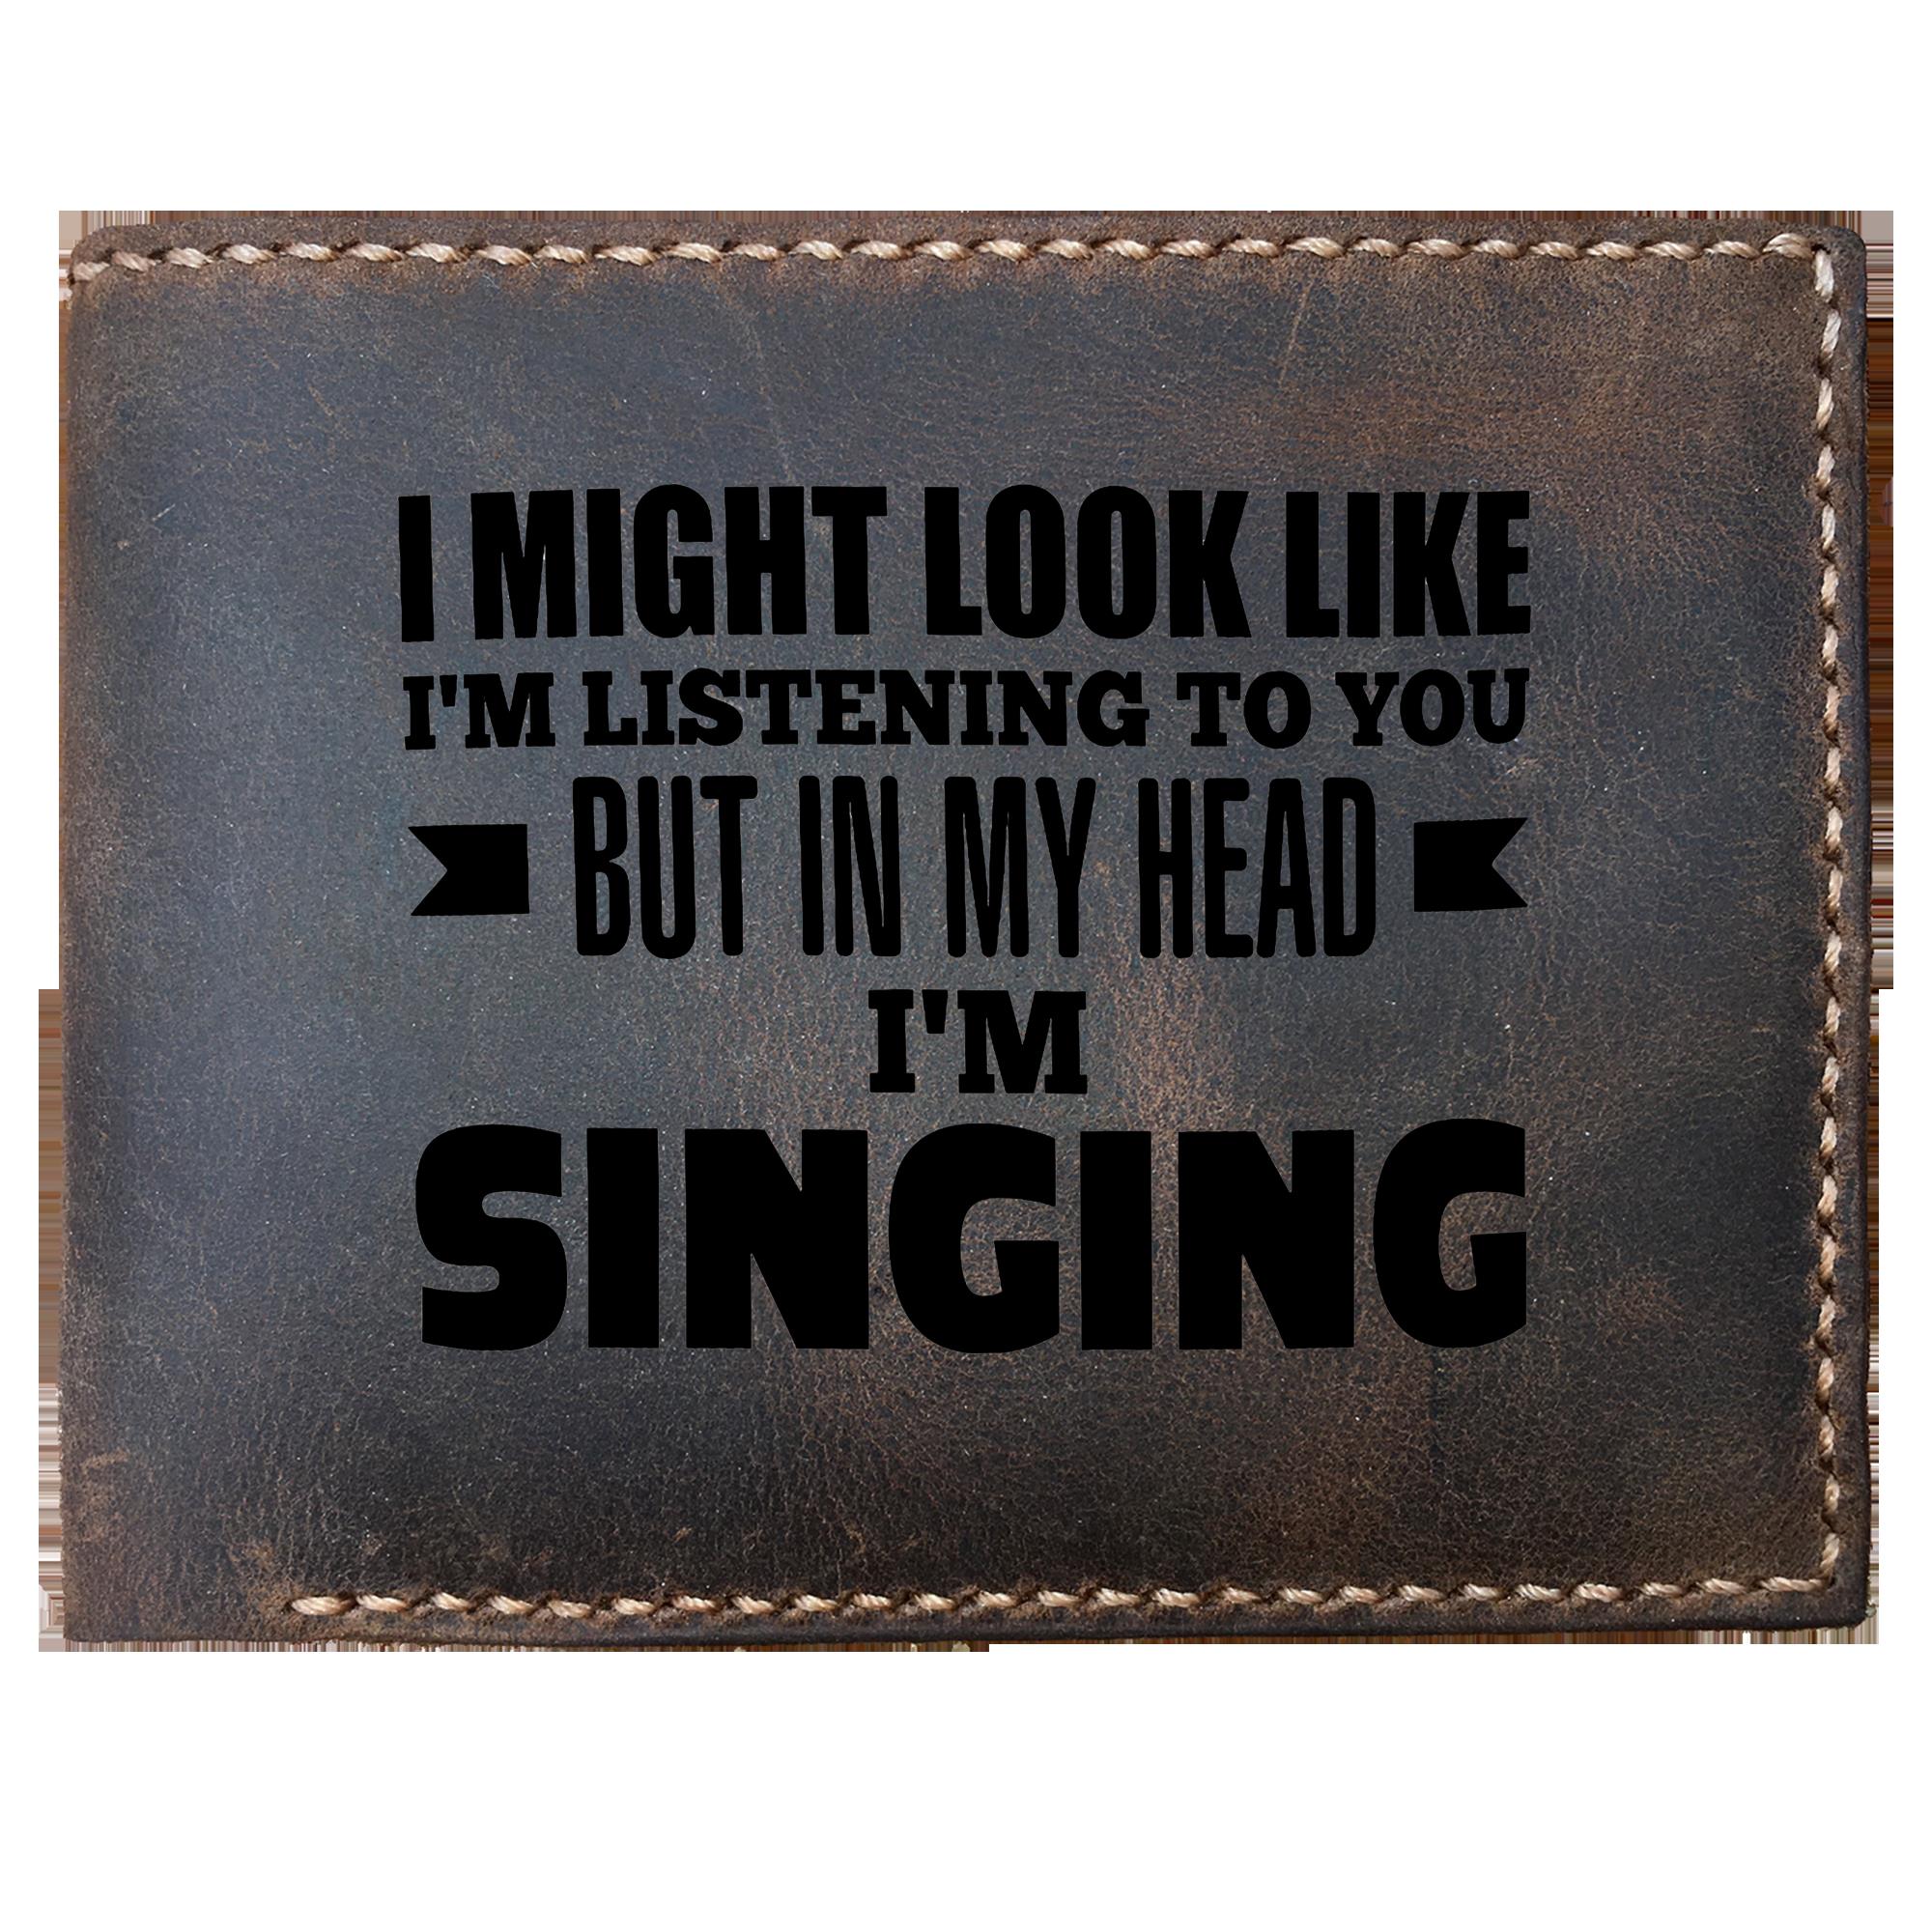 Skitongifts Funny Custom Laser Engraved Bifold Leather Wallet For Men, In My Head I'm Singing